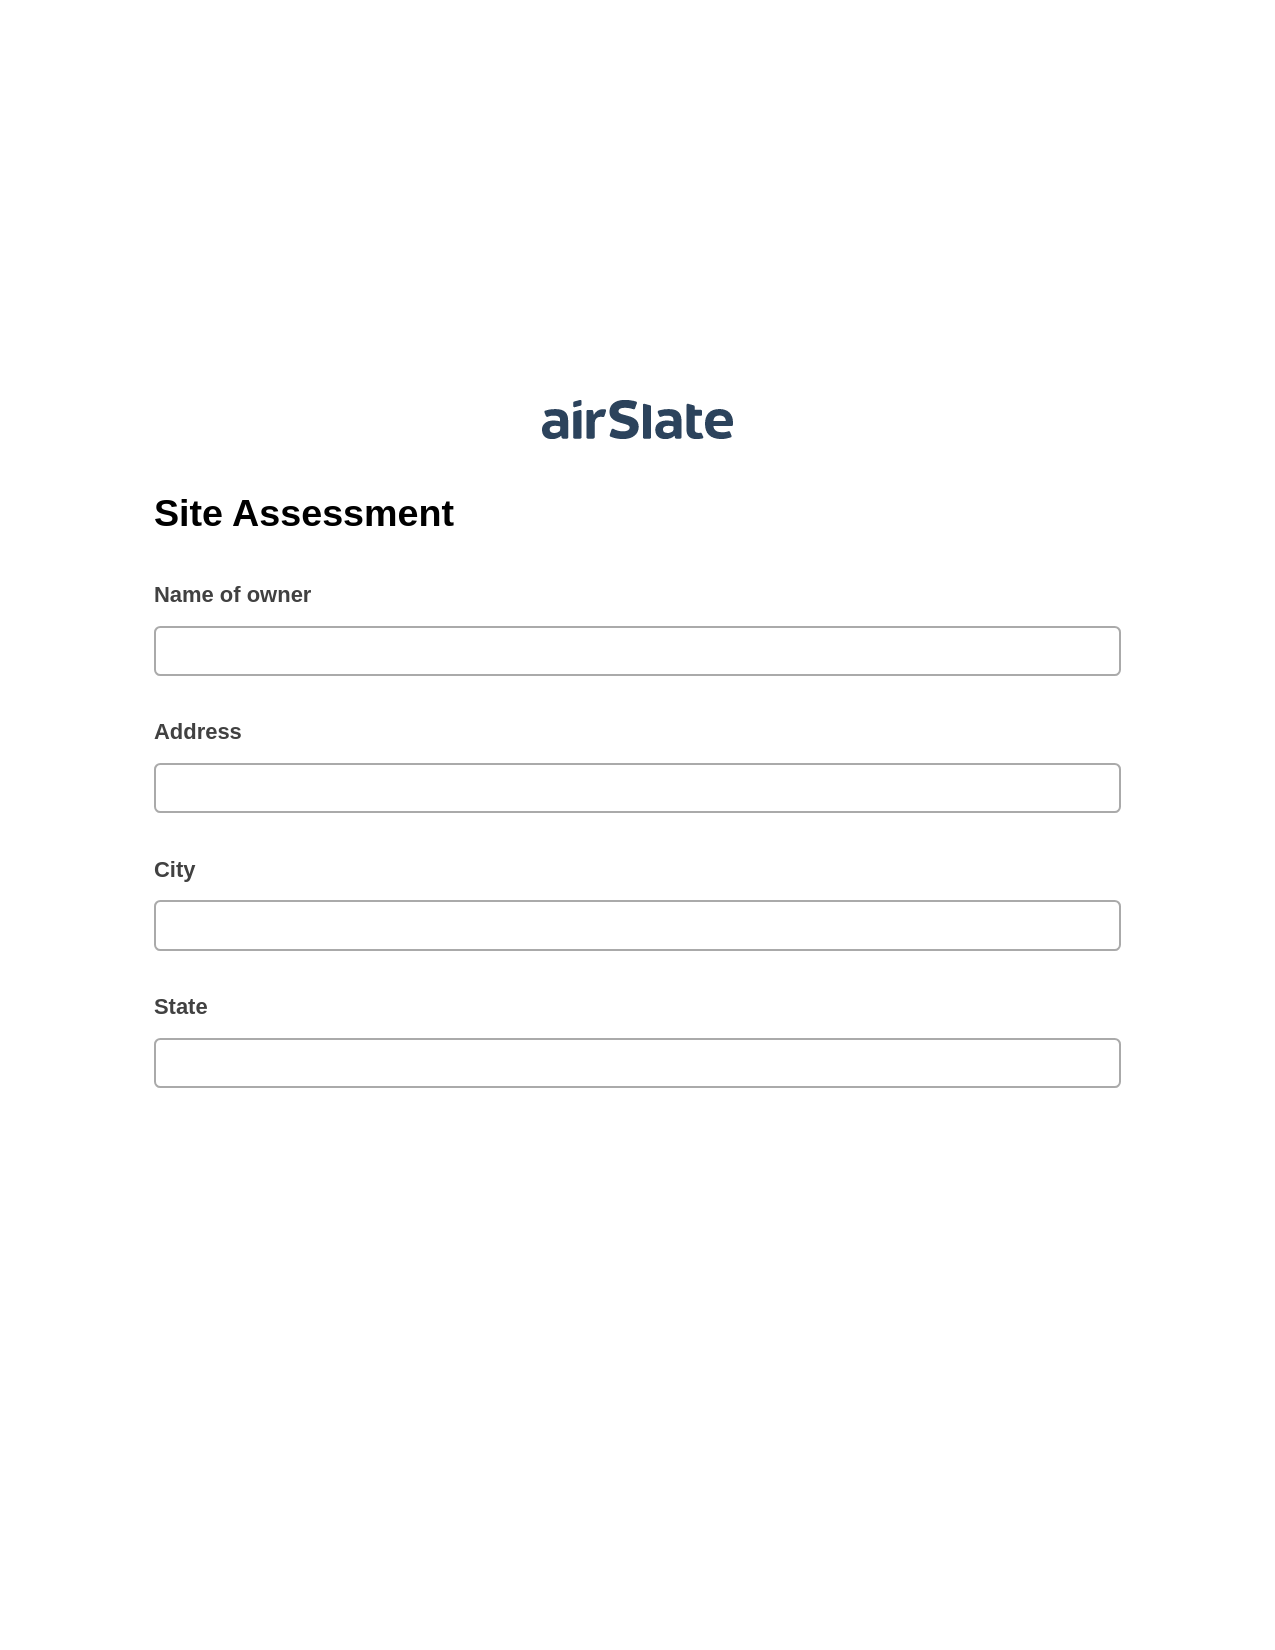 Site Assessment Pre-fill from Salesforce Records with SOQL Bot, Assign Slate Name Bot, Export to Google Sheet Bot